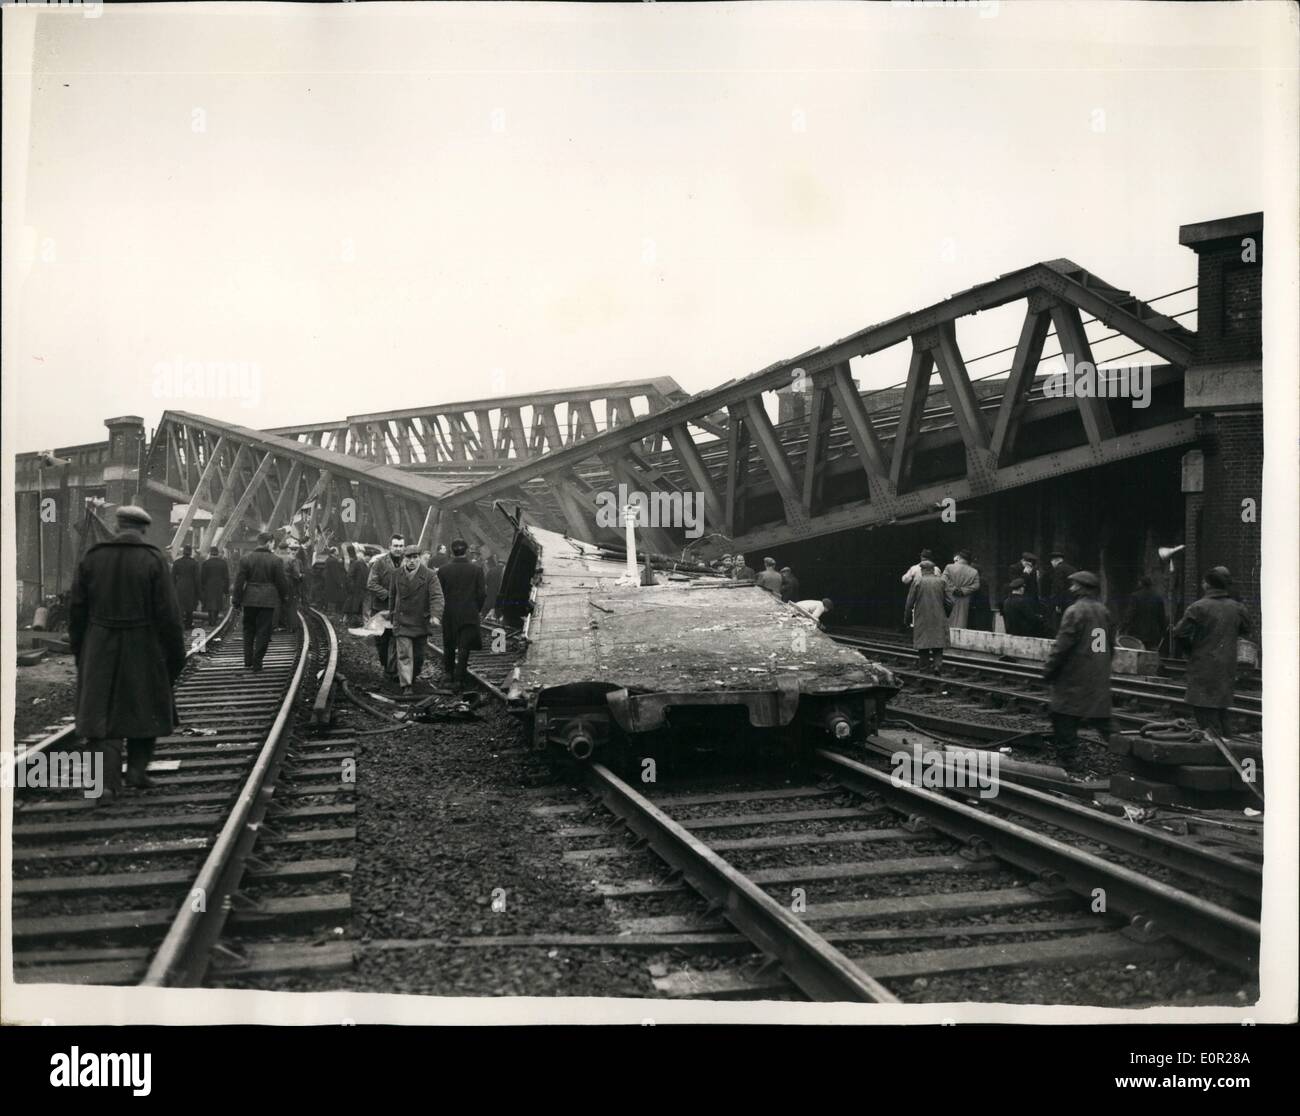 Dec. 12, 1957 - Rescue work goes on in the Lewisham Rail Crash Engineers try to Raise the Fly- over bridge. The death roll has now reached 92. in Wednesday night's Lewisham rail crash. Rescuers have toiled all night under are lights and early this morning engineers were trying o raise the wrecked bridge to clear the coach on which the full weight of the fly-over bridge fell. Photo Shows The first clear picture of the disaster taken after the fog had lifted today showing the fly-over bridge which collapsed on one of the trains after the crash Stock Photo